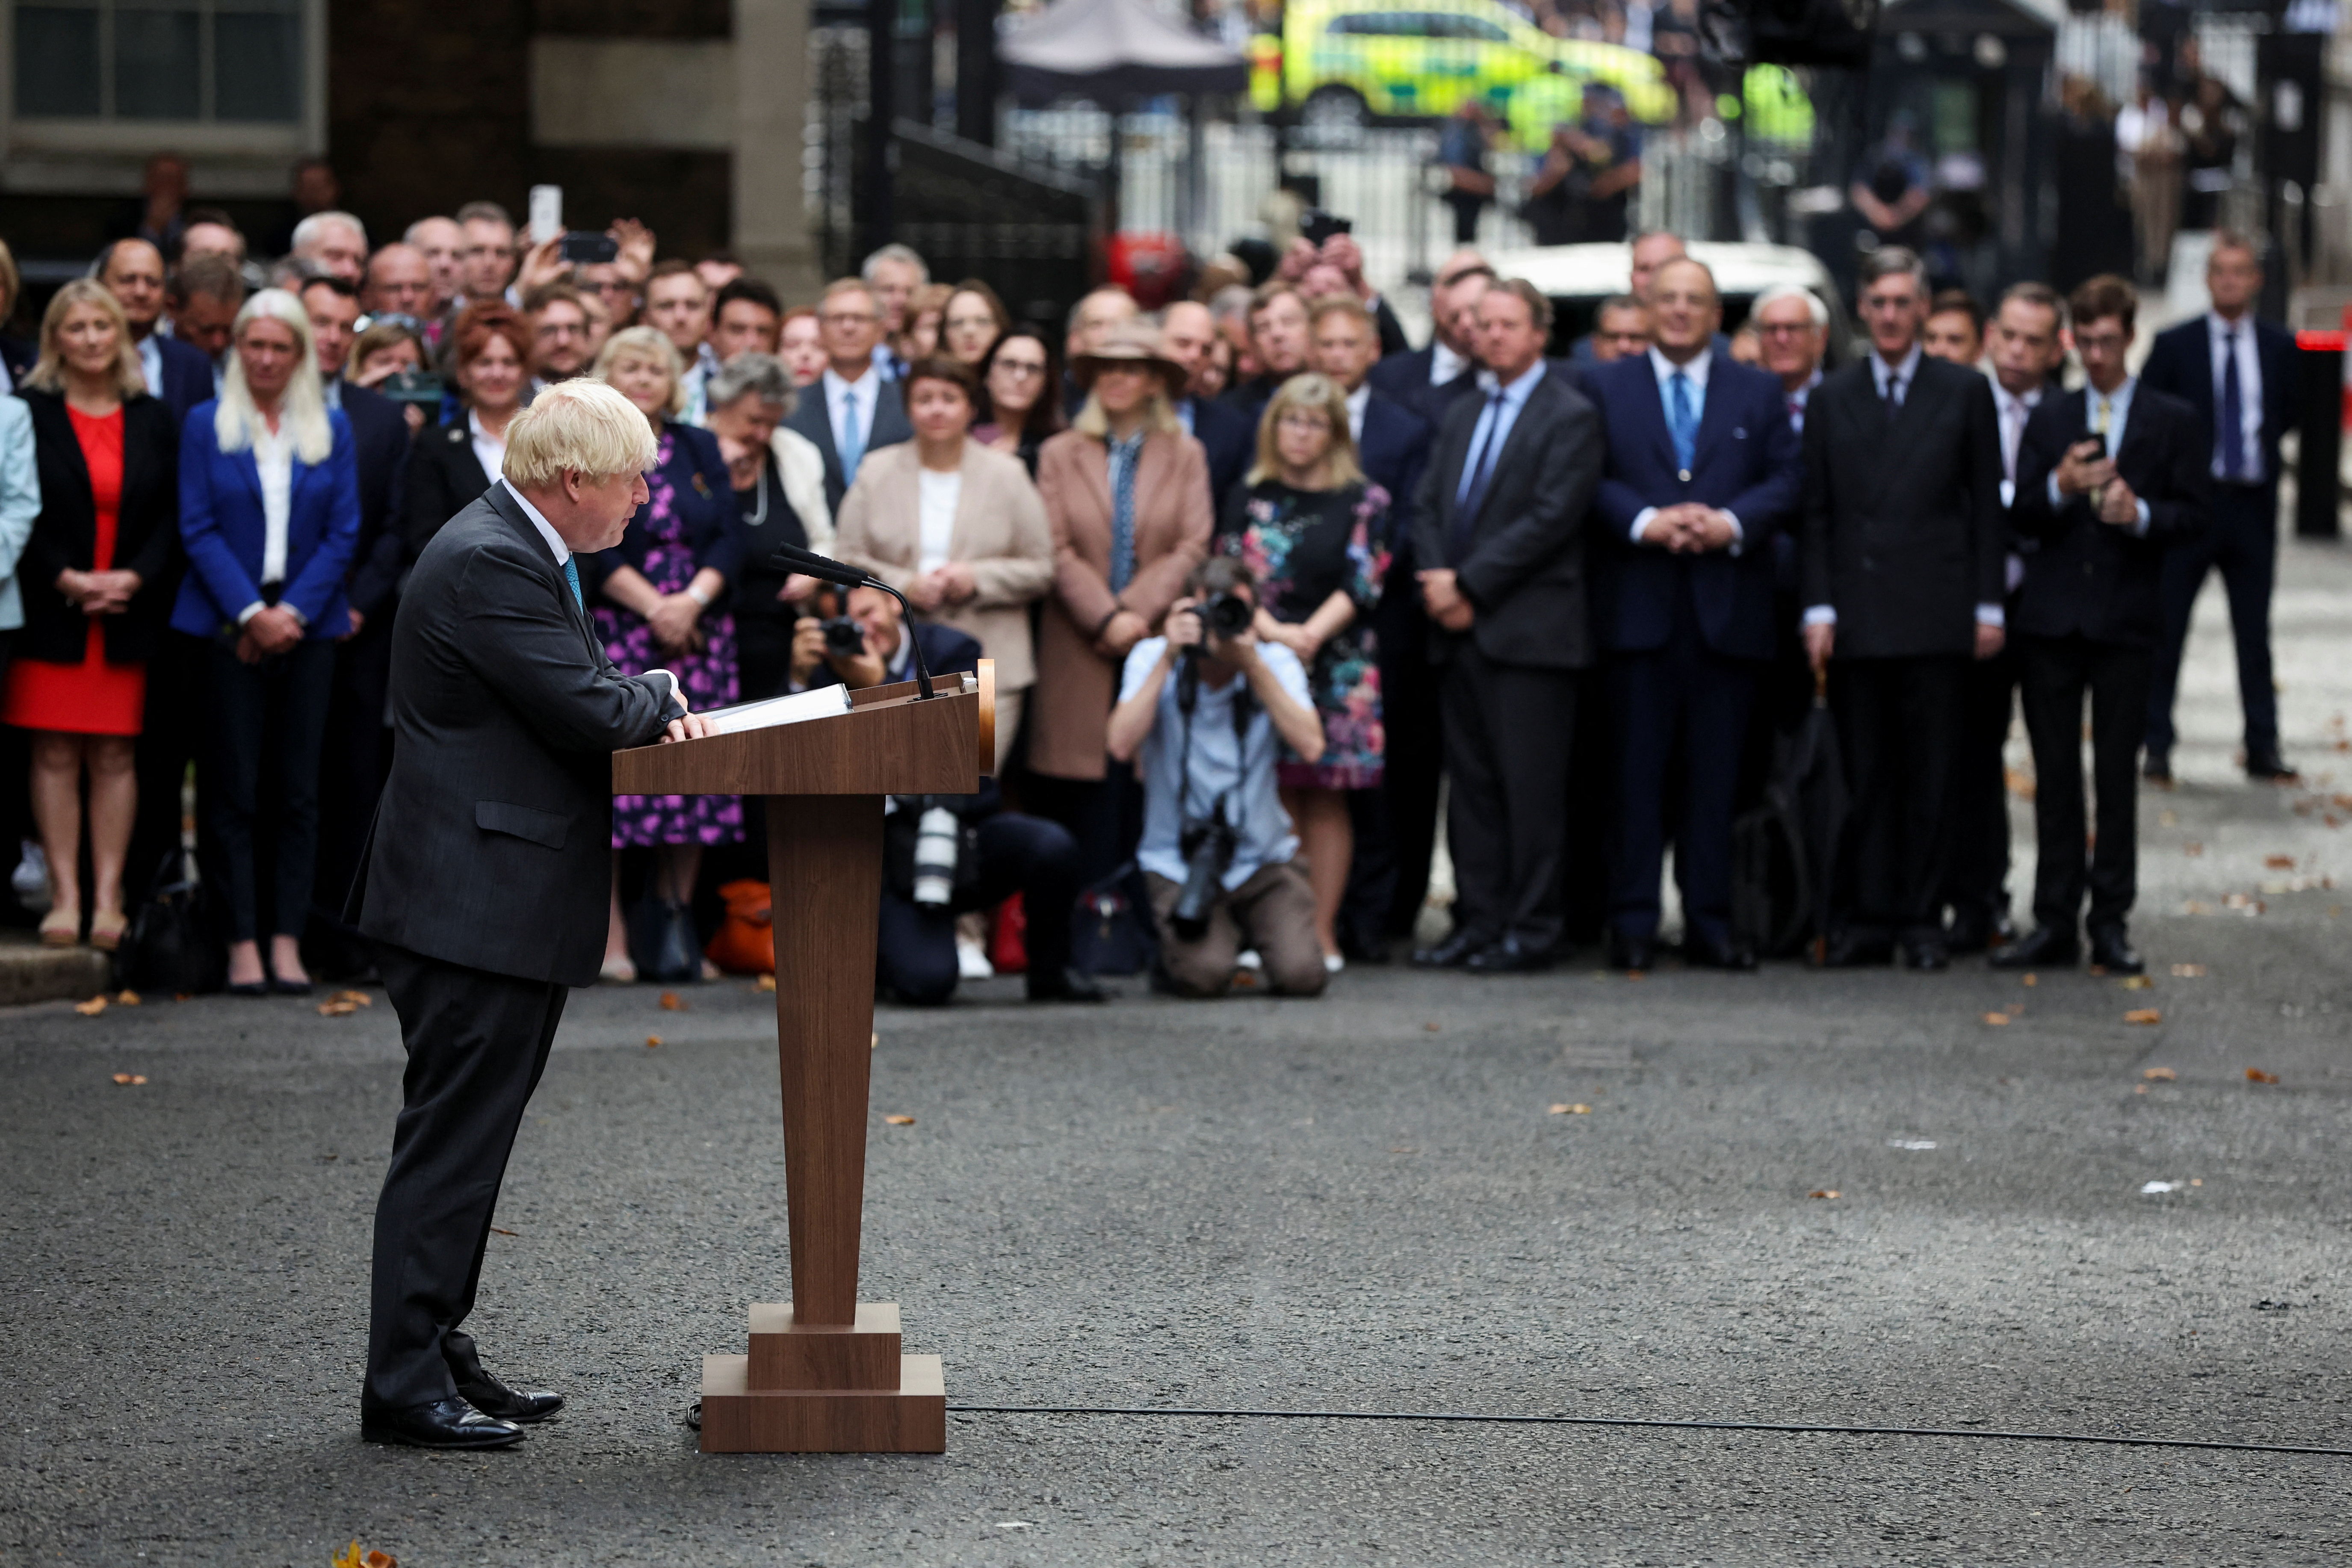 Outgoing British PM Boris Johnson delivers a speech in Downing Street in London